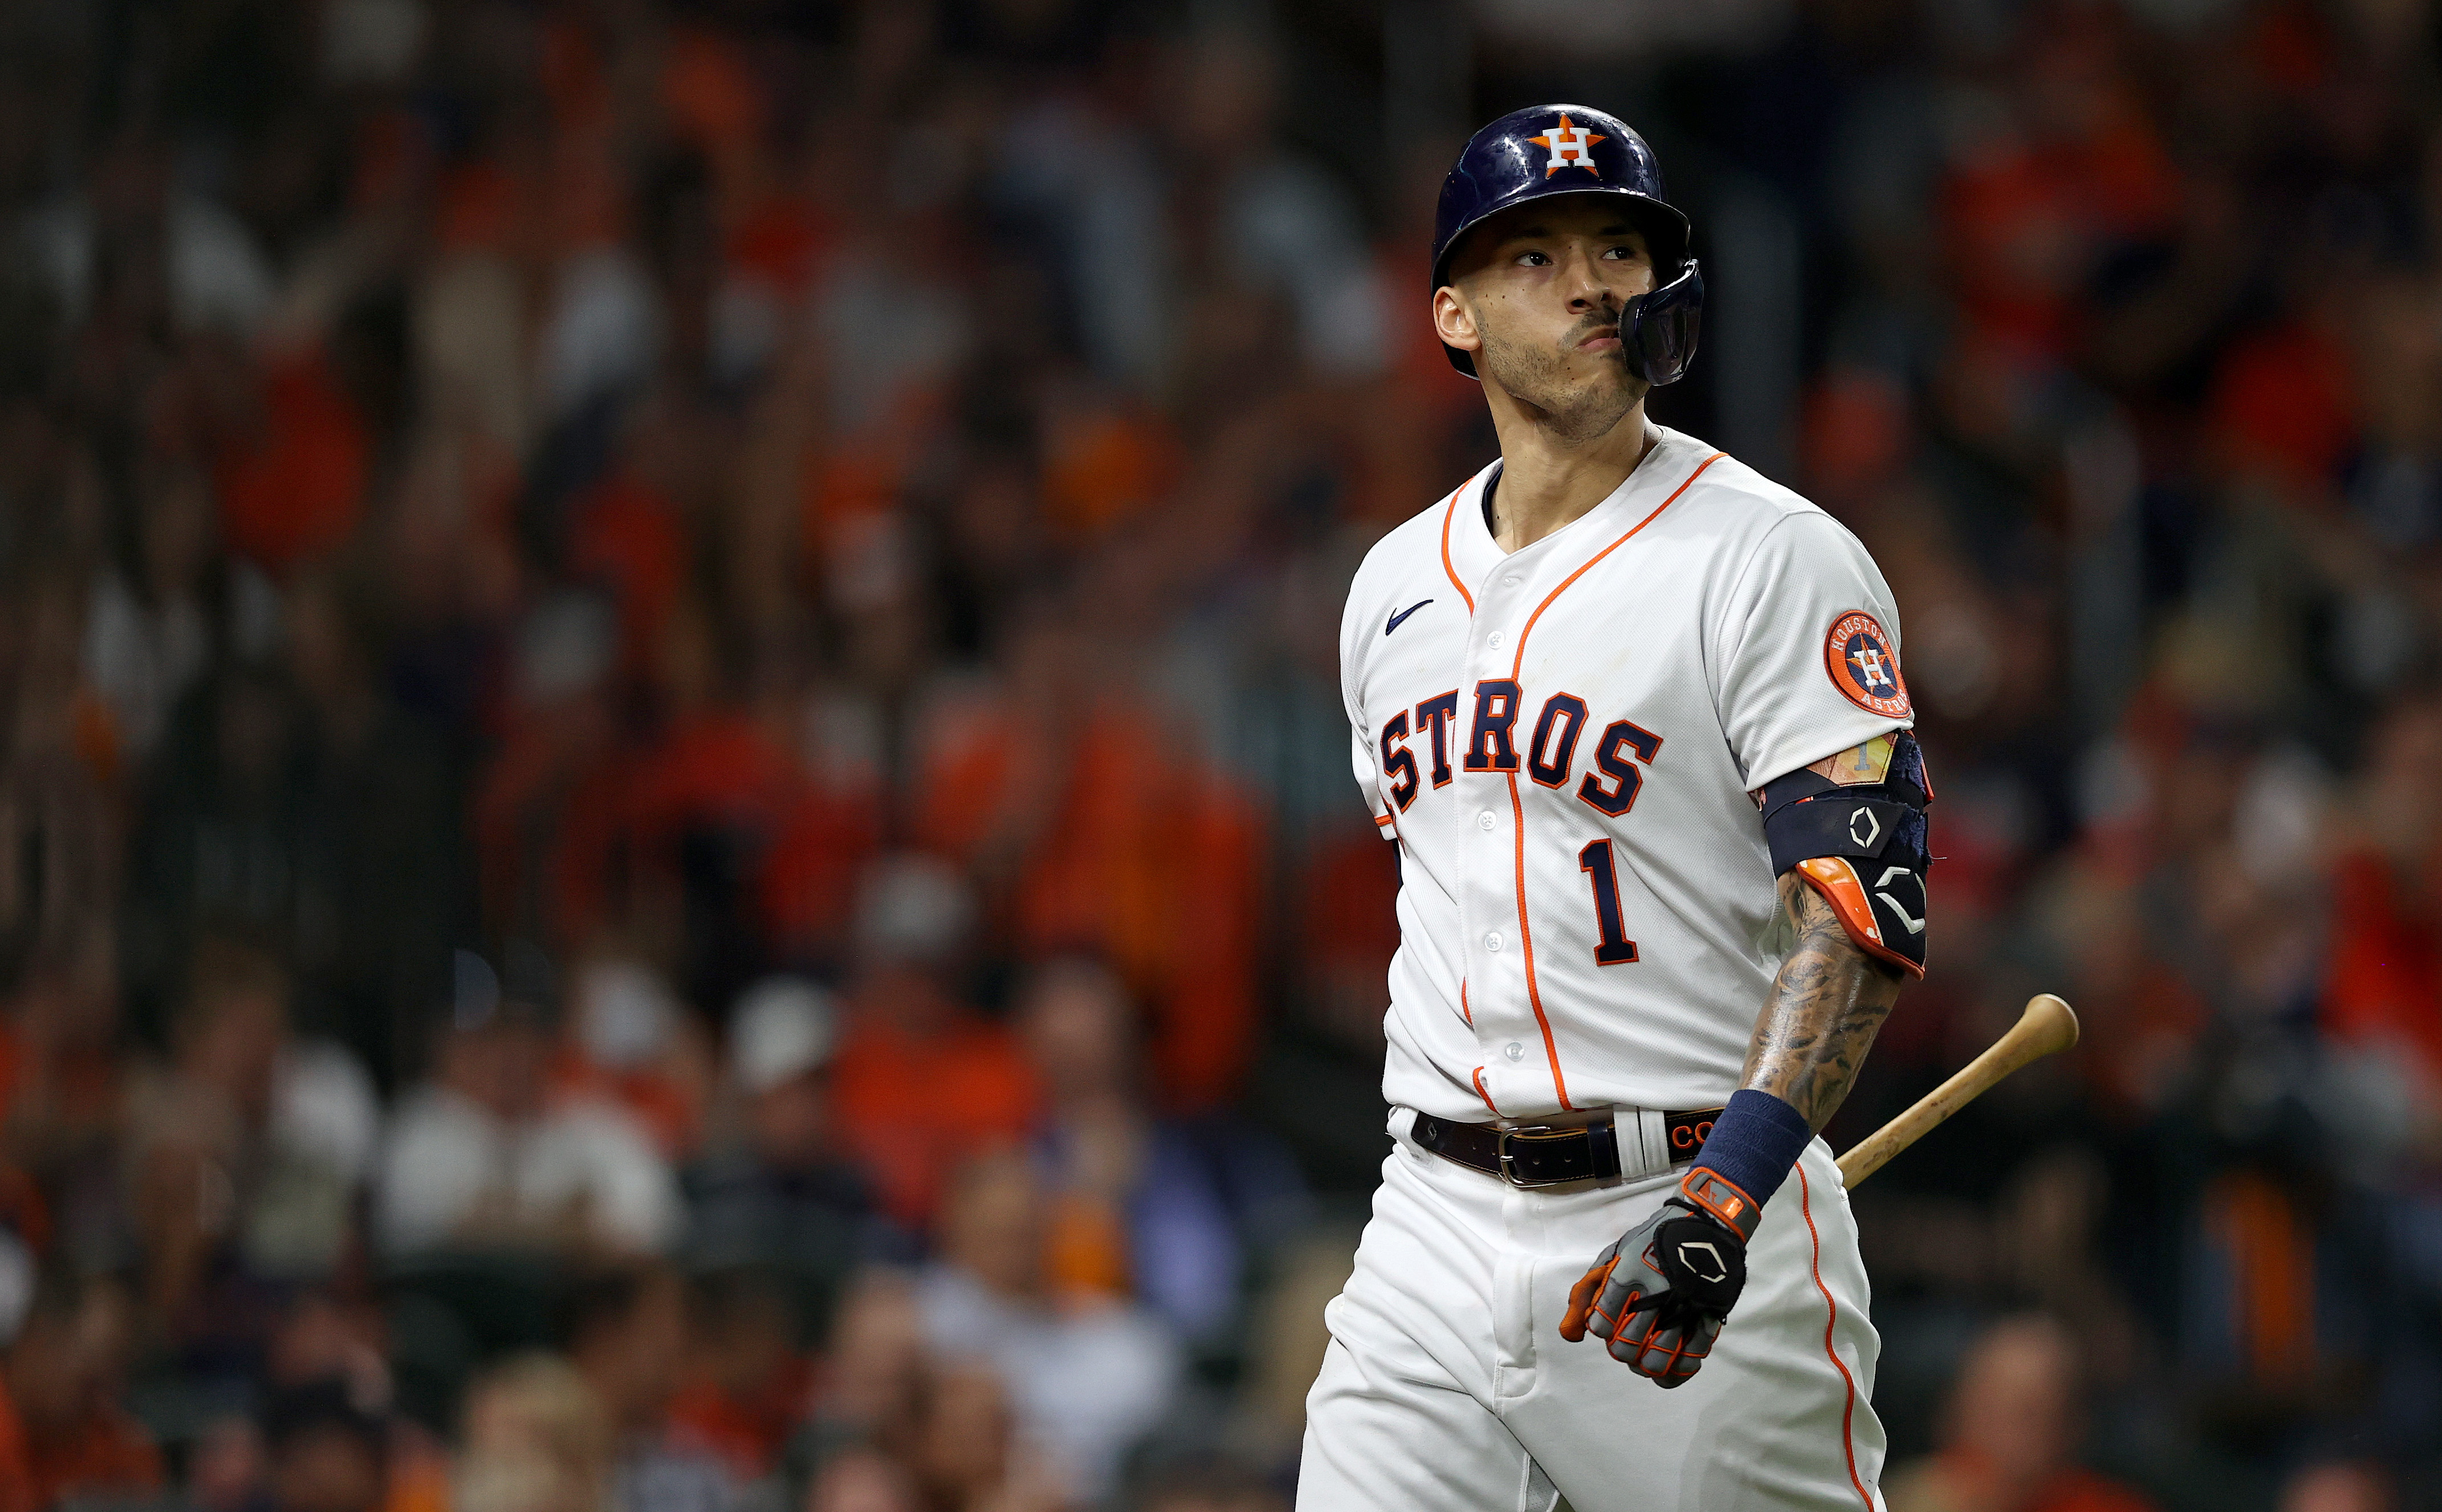 If not Carlos Correa, who plays SS for the New York Yankees?